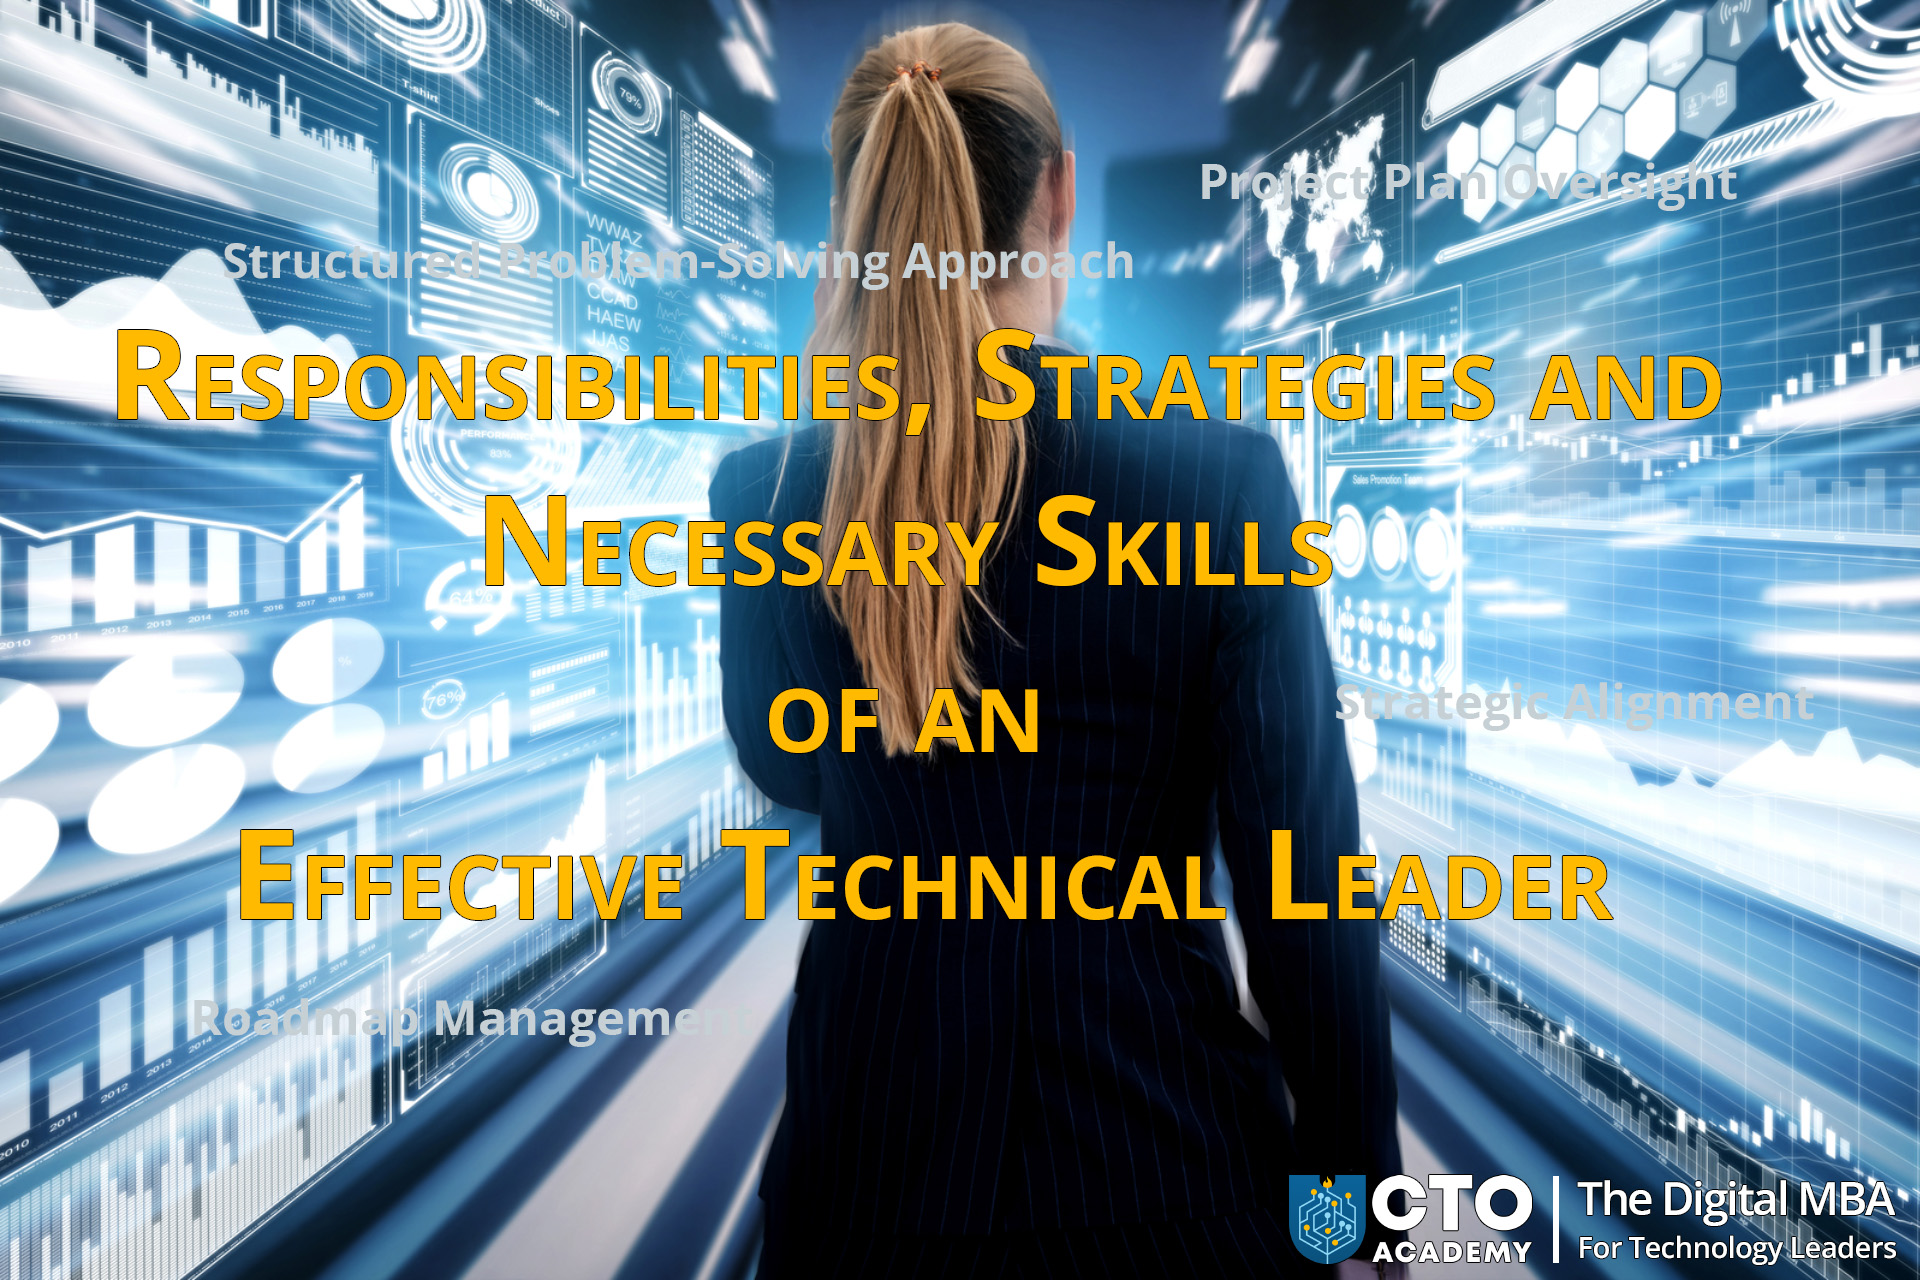 Responsibilities Strategy and Skills of Technical Leader